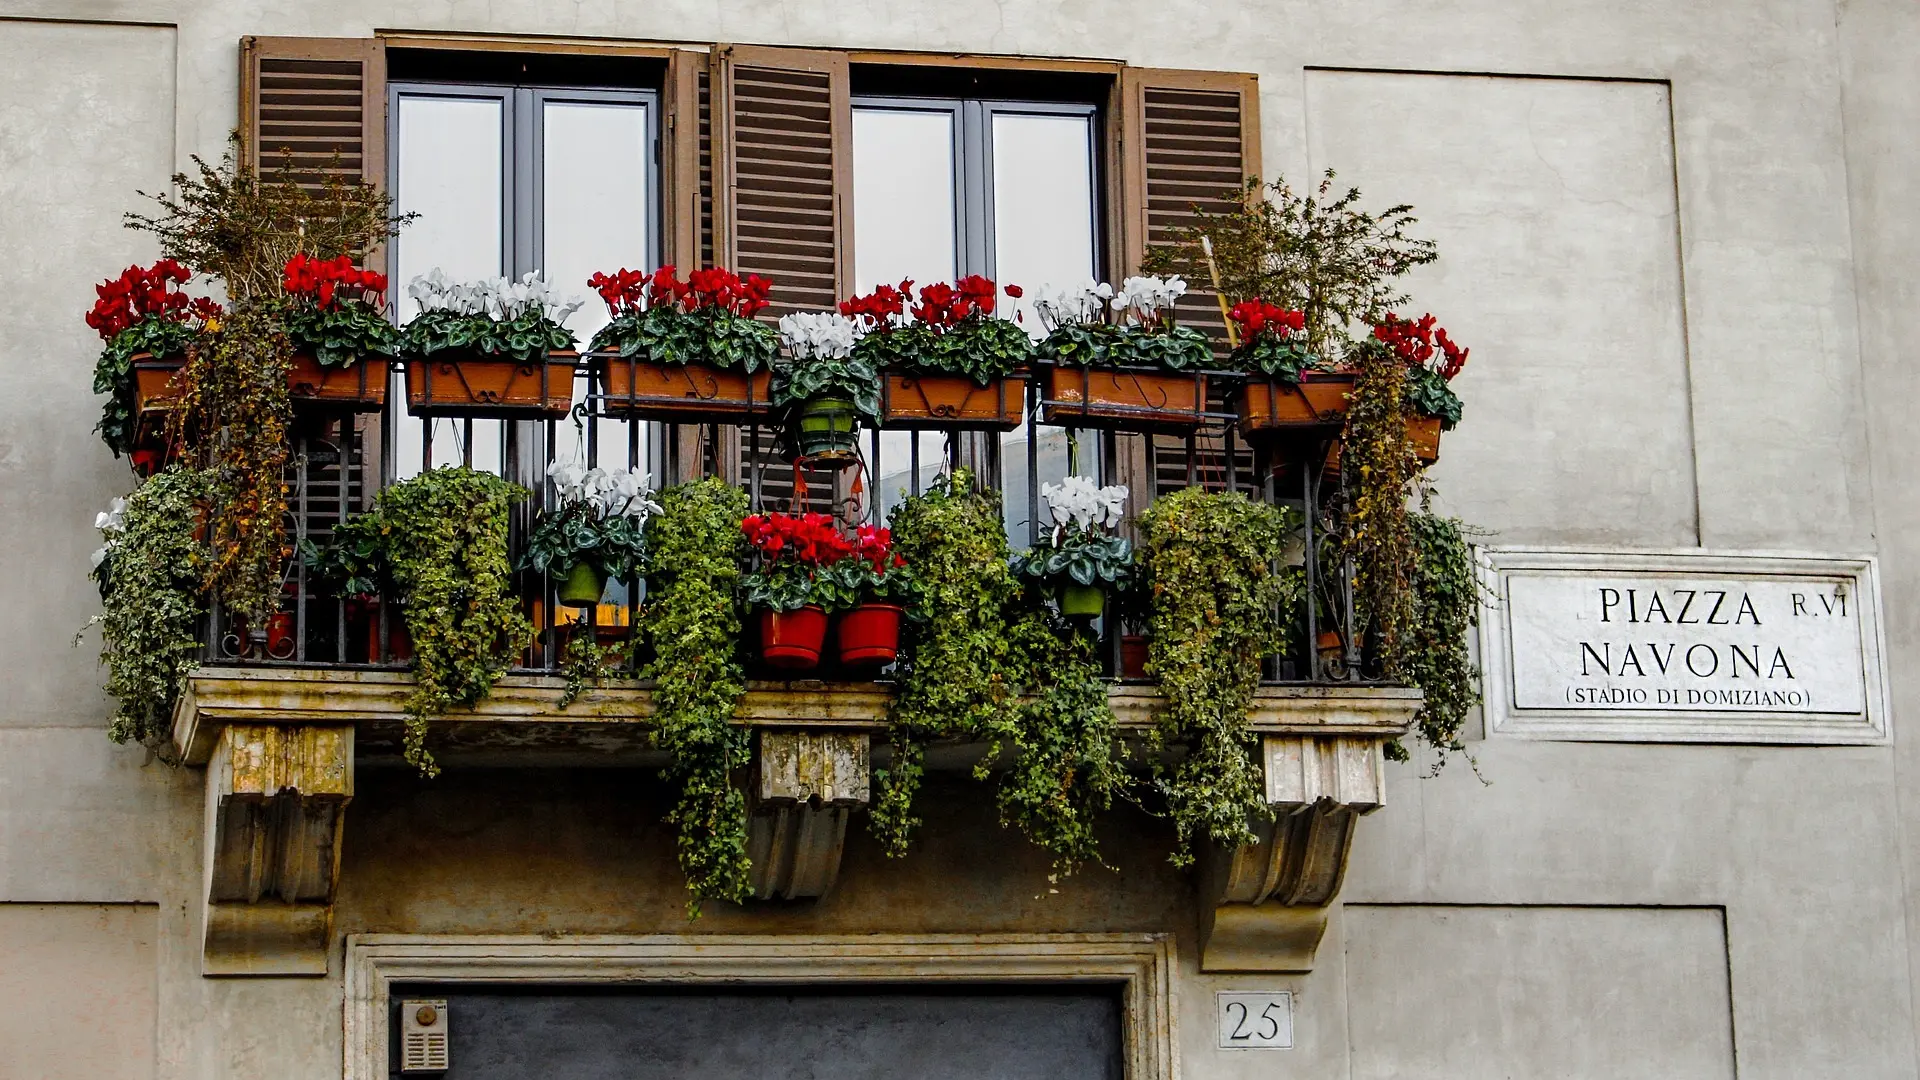 Iconic building with a private terrace feautering roses and plants with a sign saying PIAZZA NAVONA (STADIO DI DOMIZIANO)